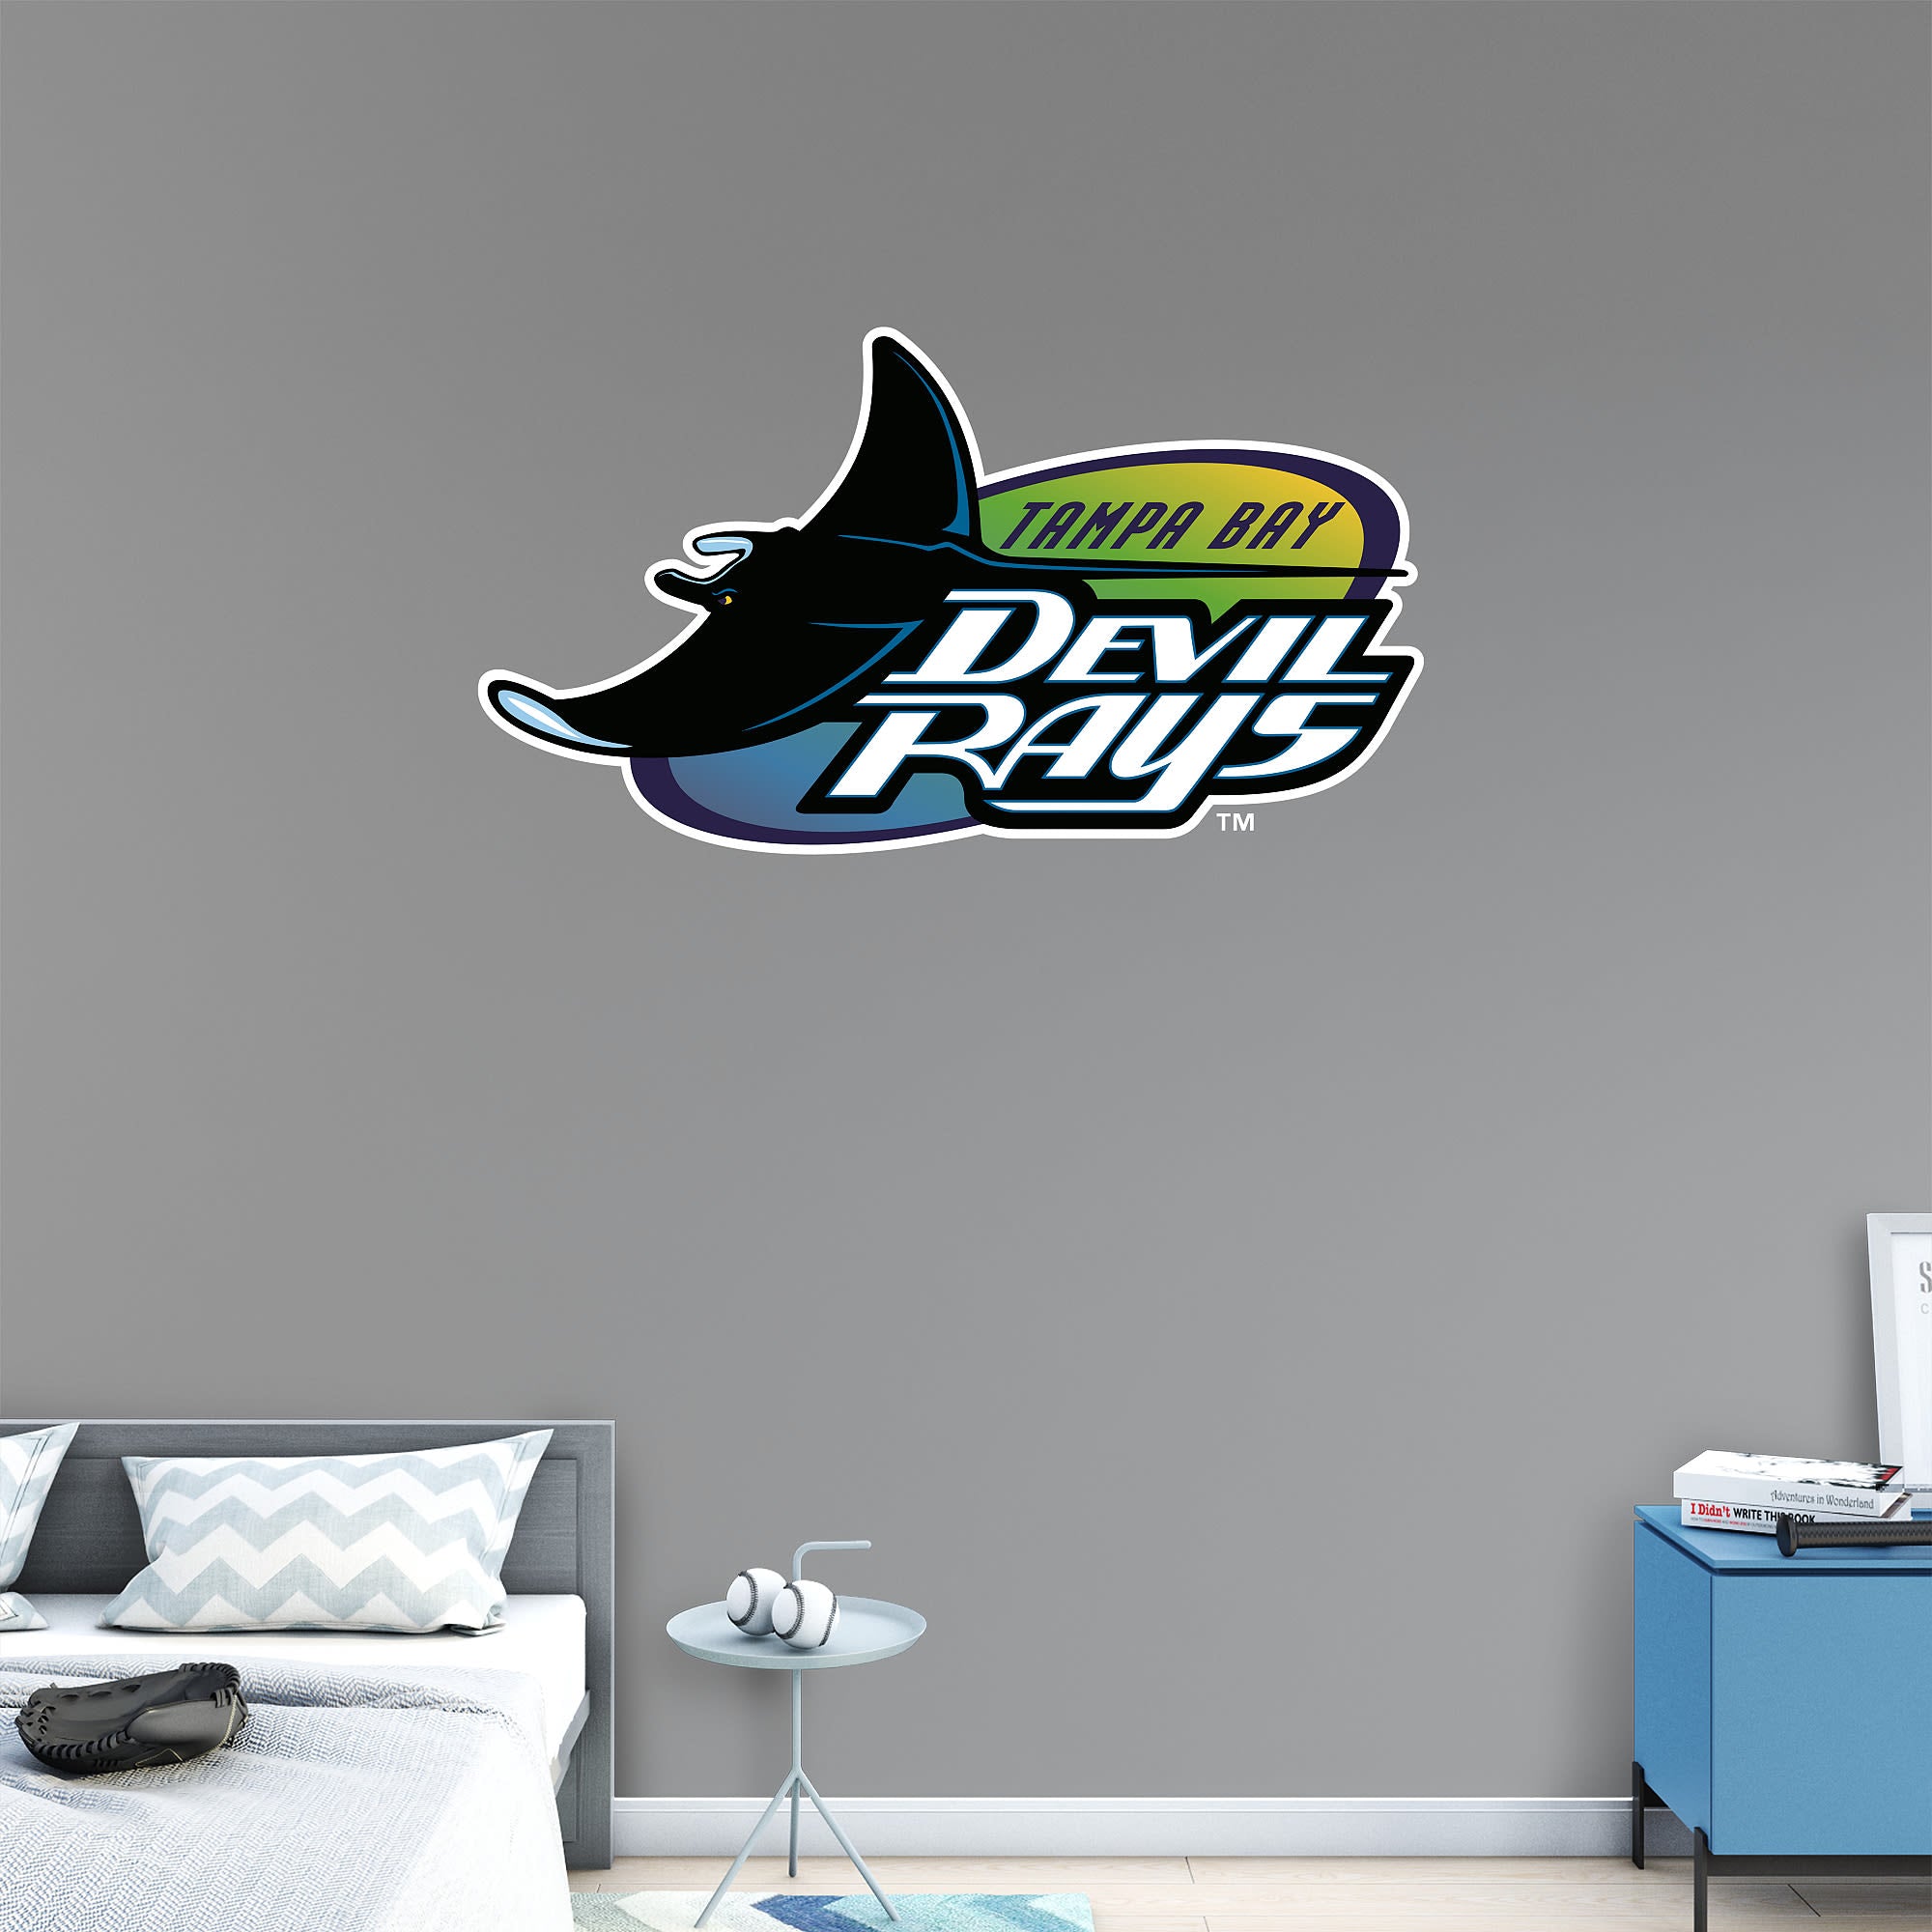 Tampa Bay Rays: Classic Logo - Officially Licensed MLB Removable Wall Decal 51.0"W x 29.0"H by Fathead | Vinyl